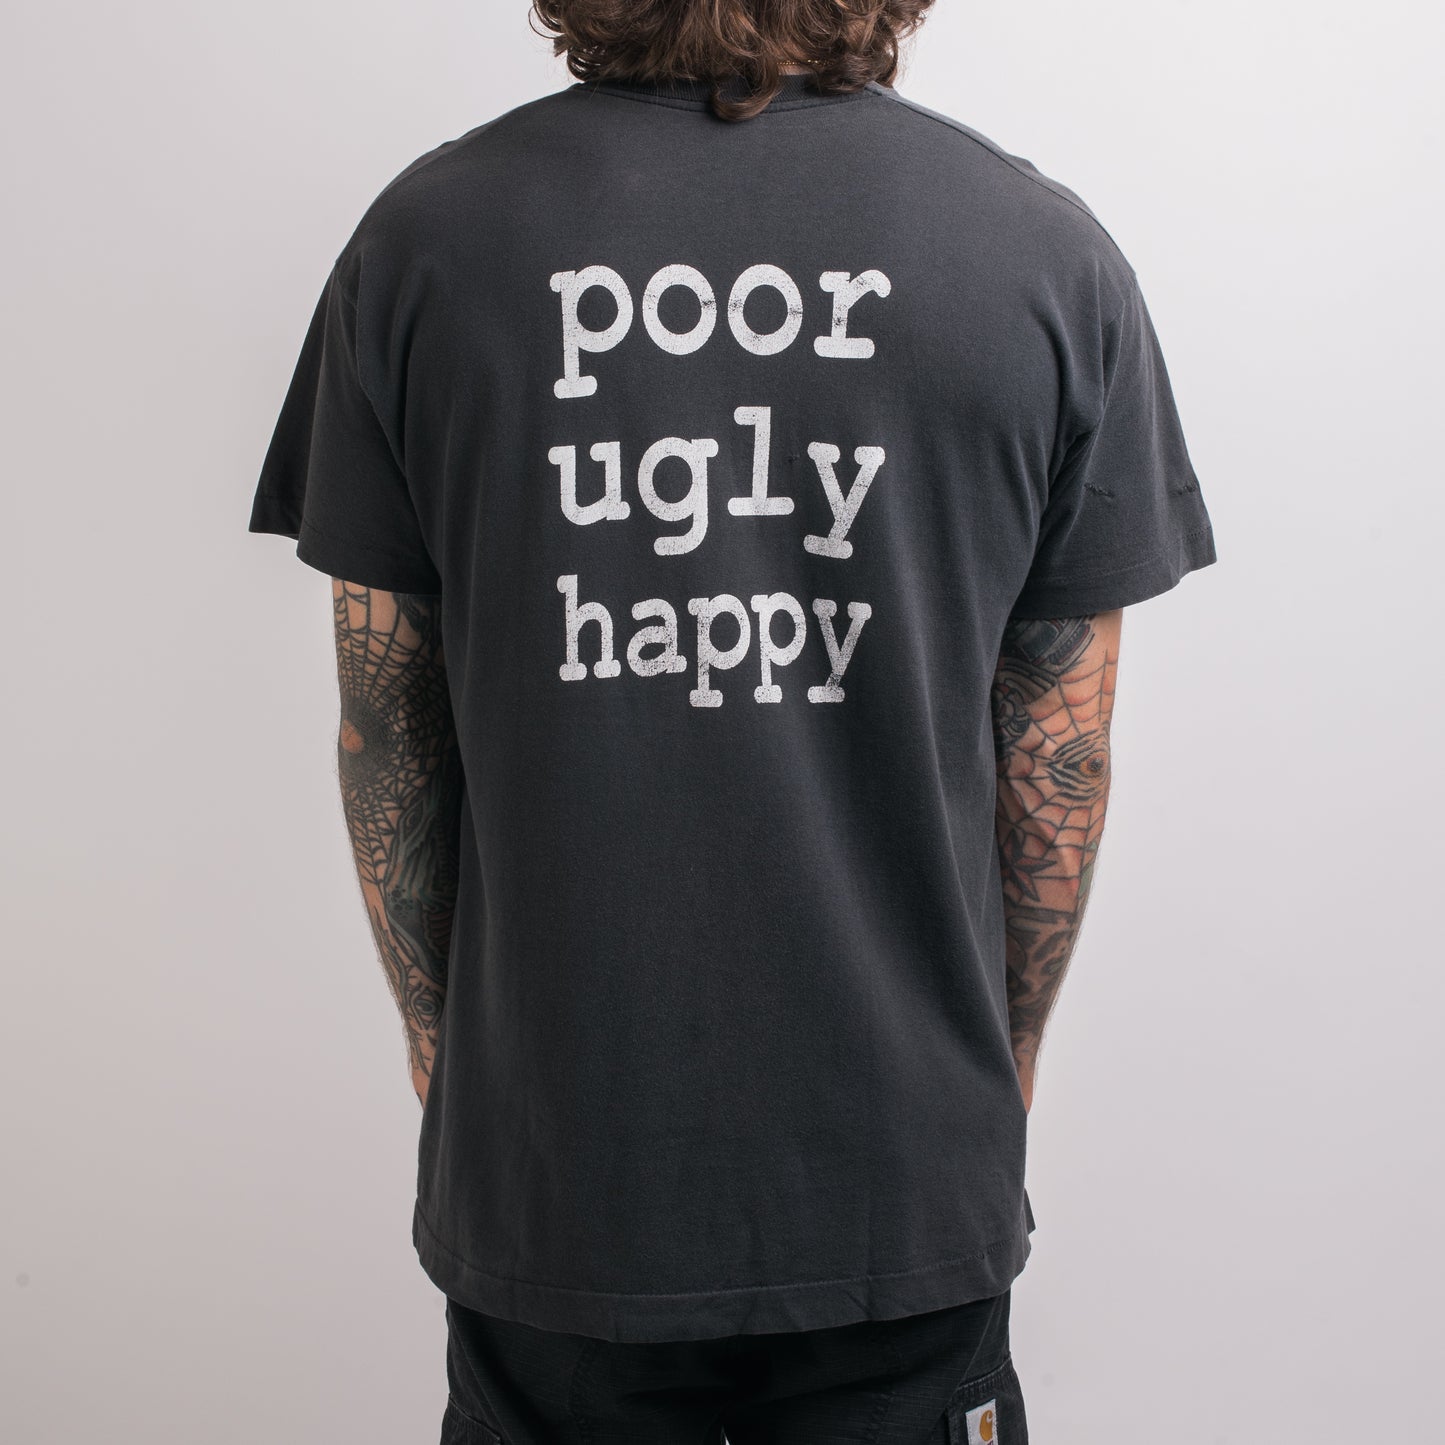 Vintage 90’s Avail Poor Ugly Happy T-Shirt